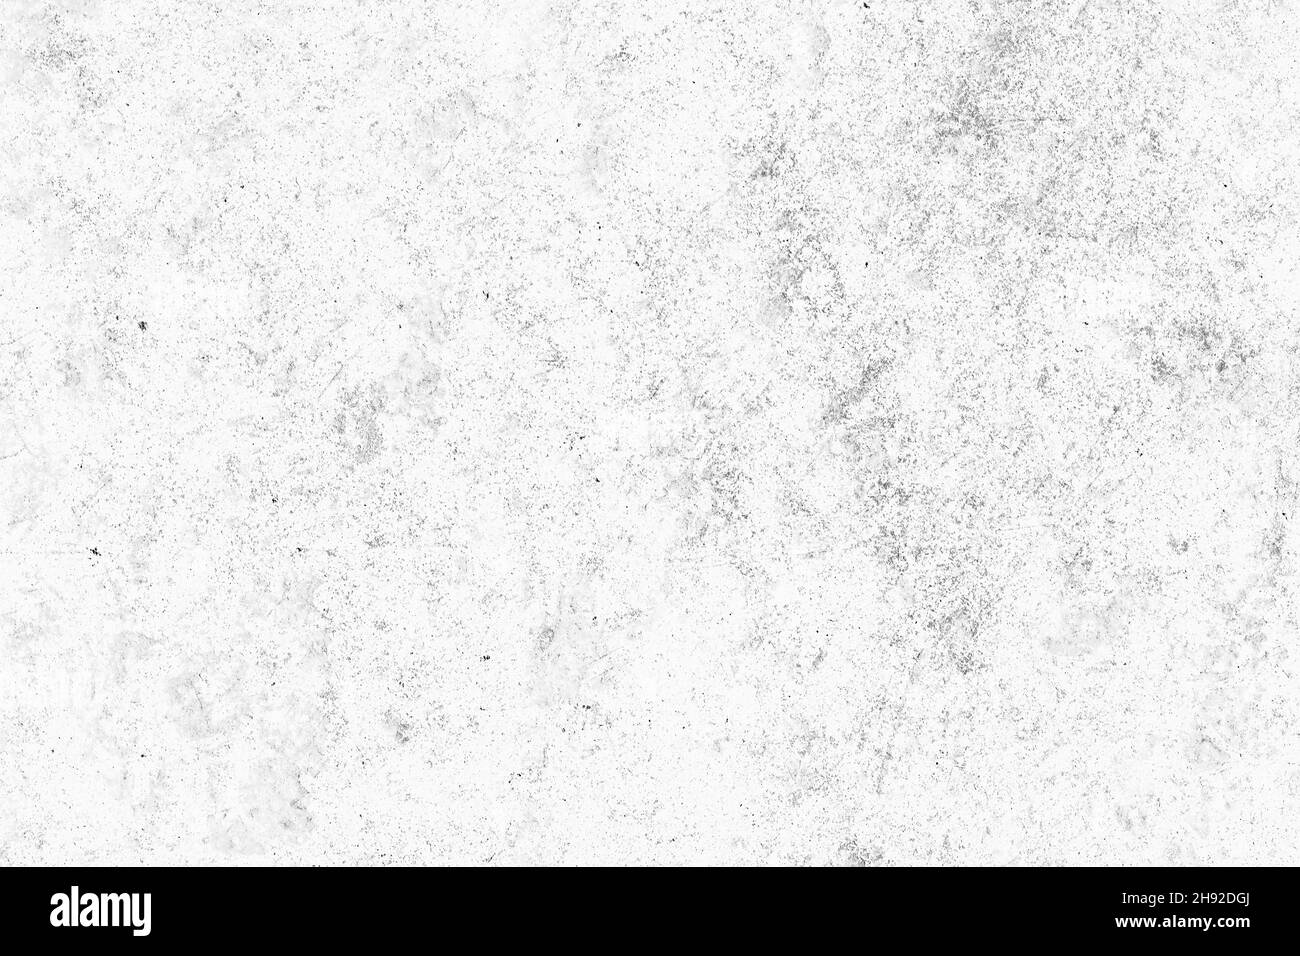 Minimalist seamless concrete surface background with grunge texture ...